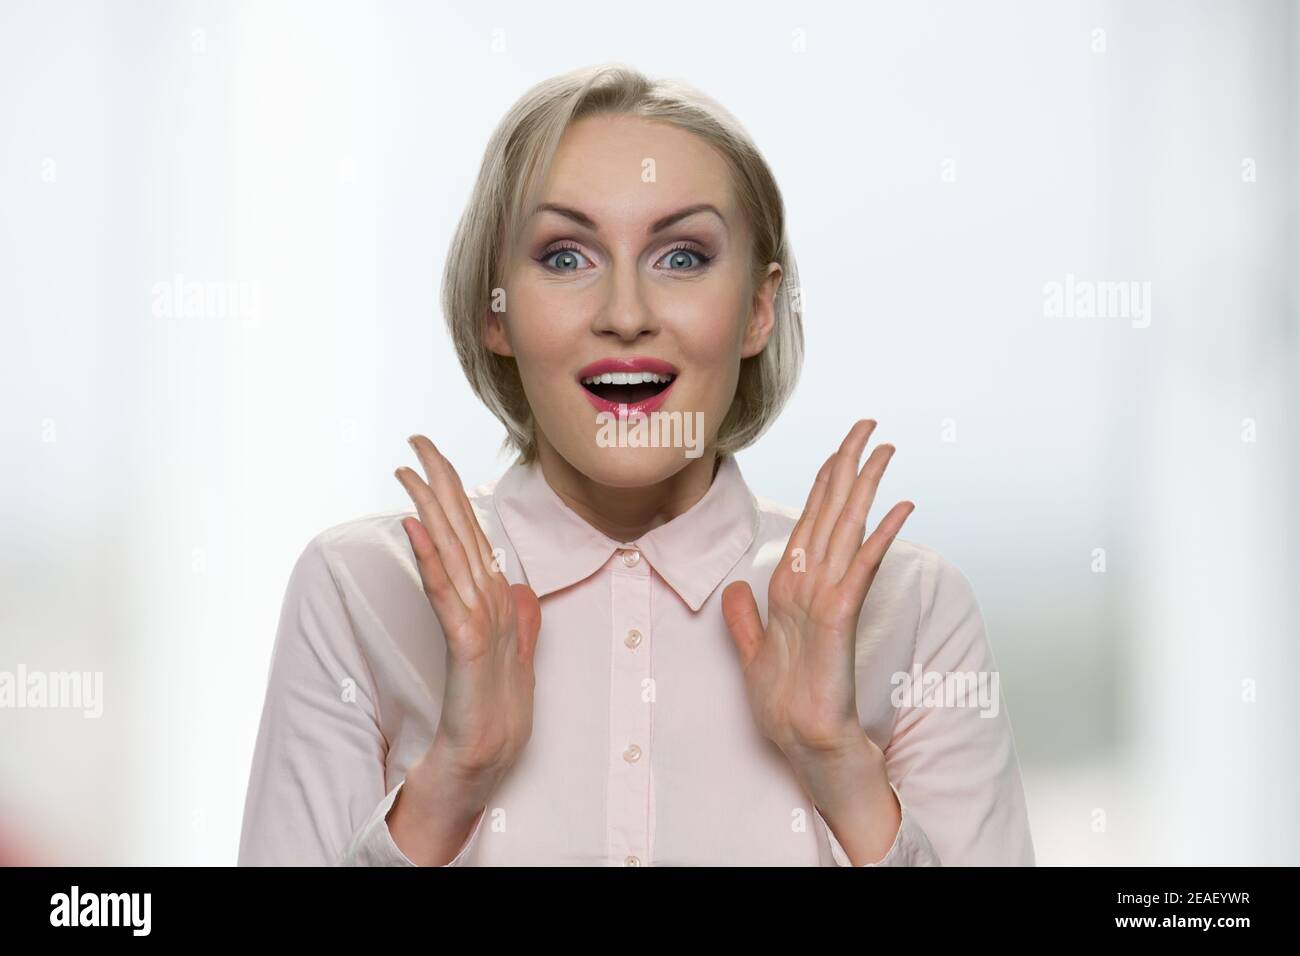 Excited businesswoman in white blouse. Stock Photo